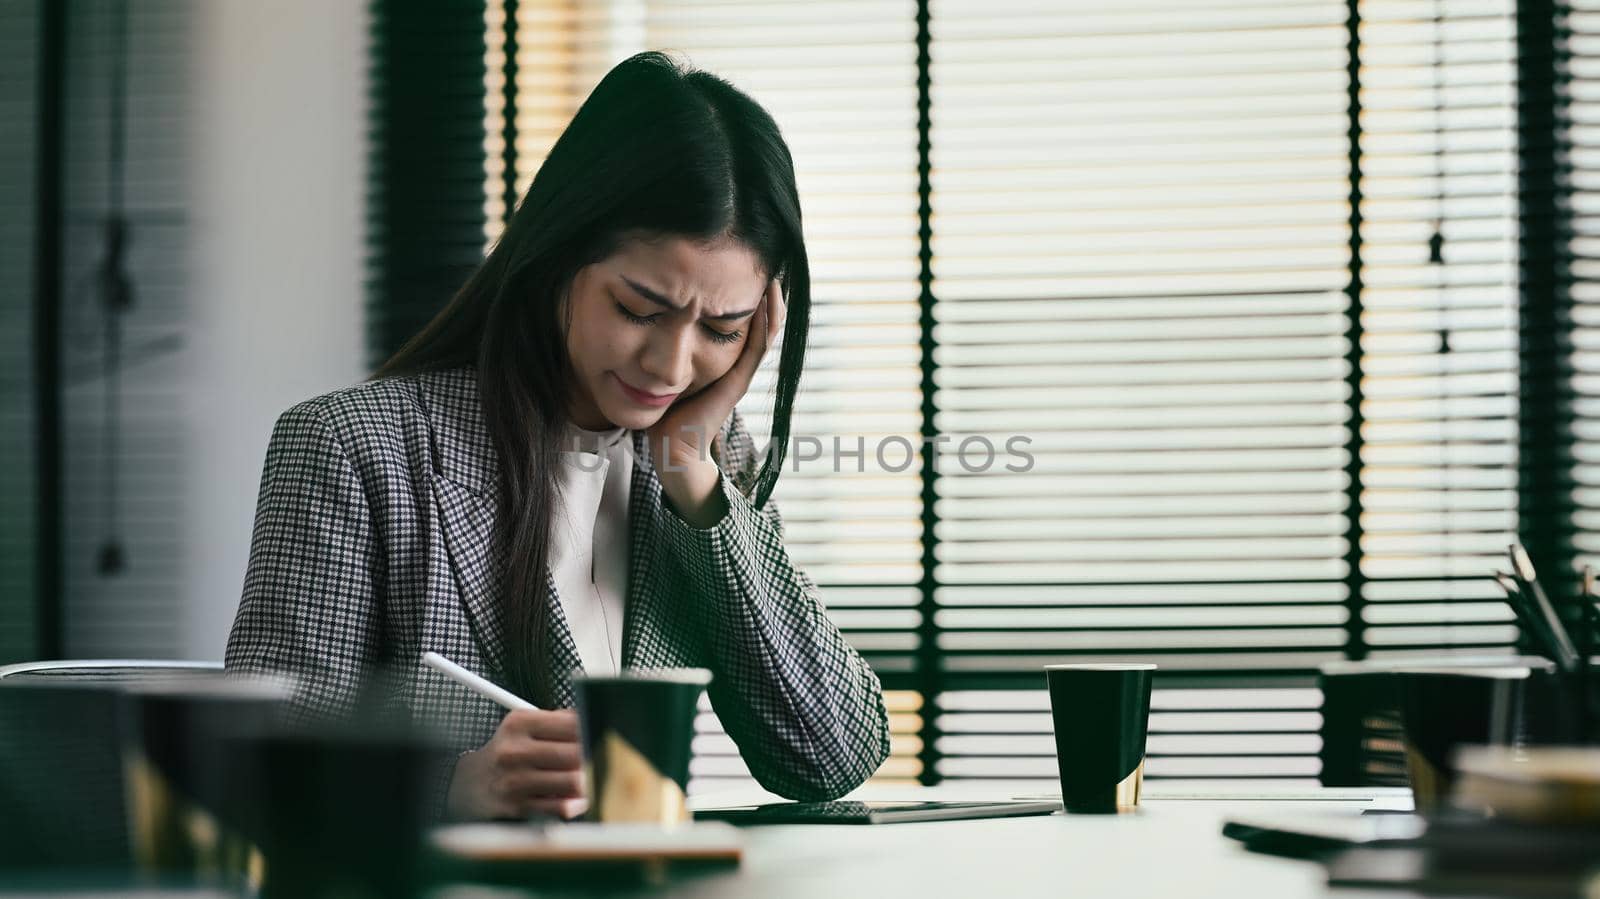 Frustrated businesswoman tired and stressed about work. Stressful life and deadlines concept.